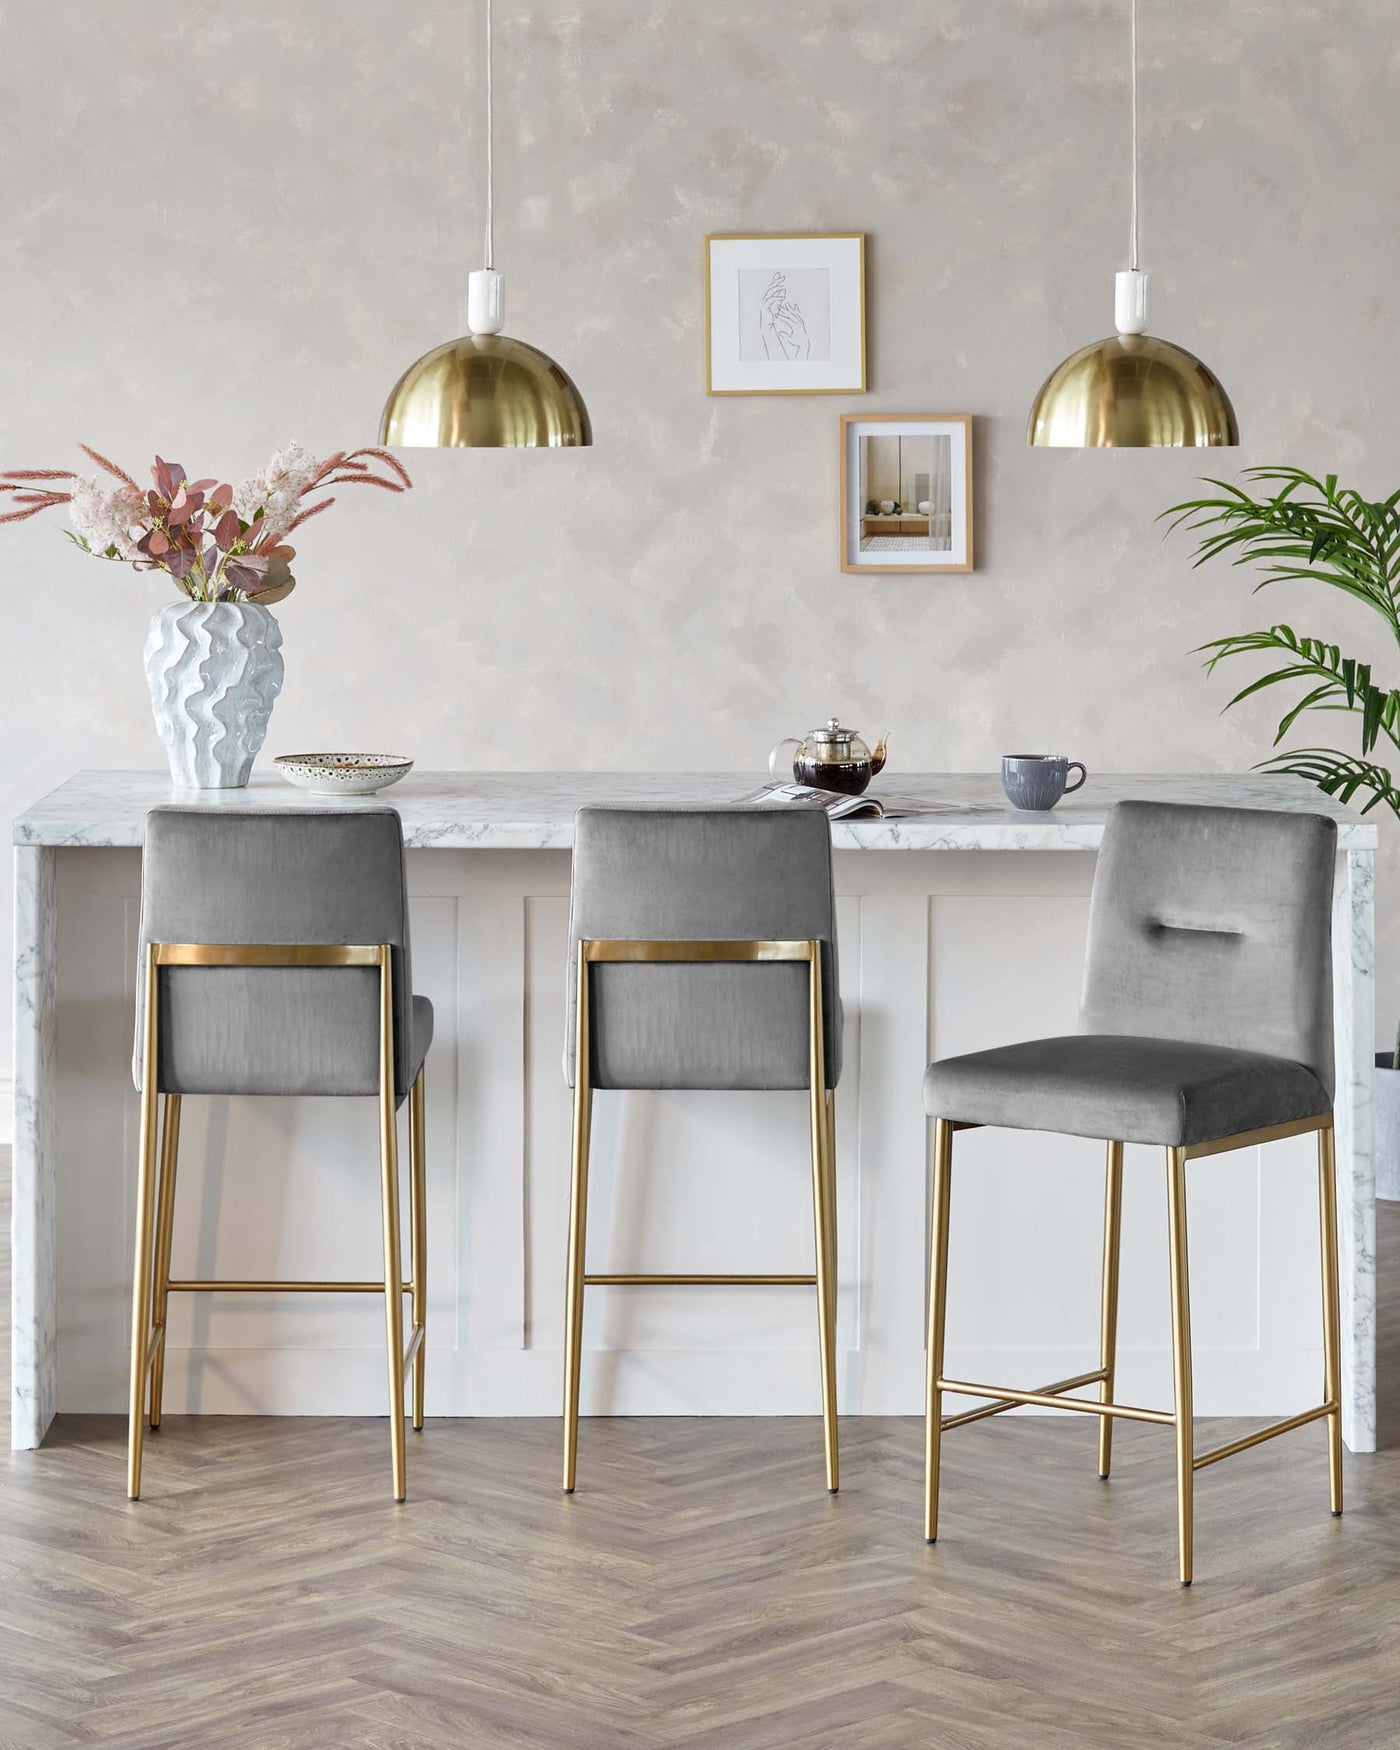 Modern elegant kitchen set with three grey upholstered bar stools featuring gold metal legs, placed at a white kitchen island with a marble countertop.